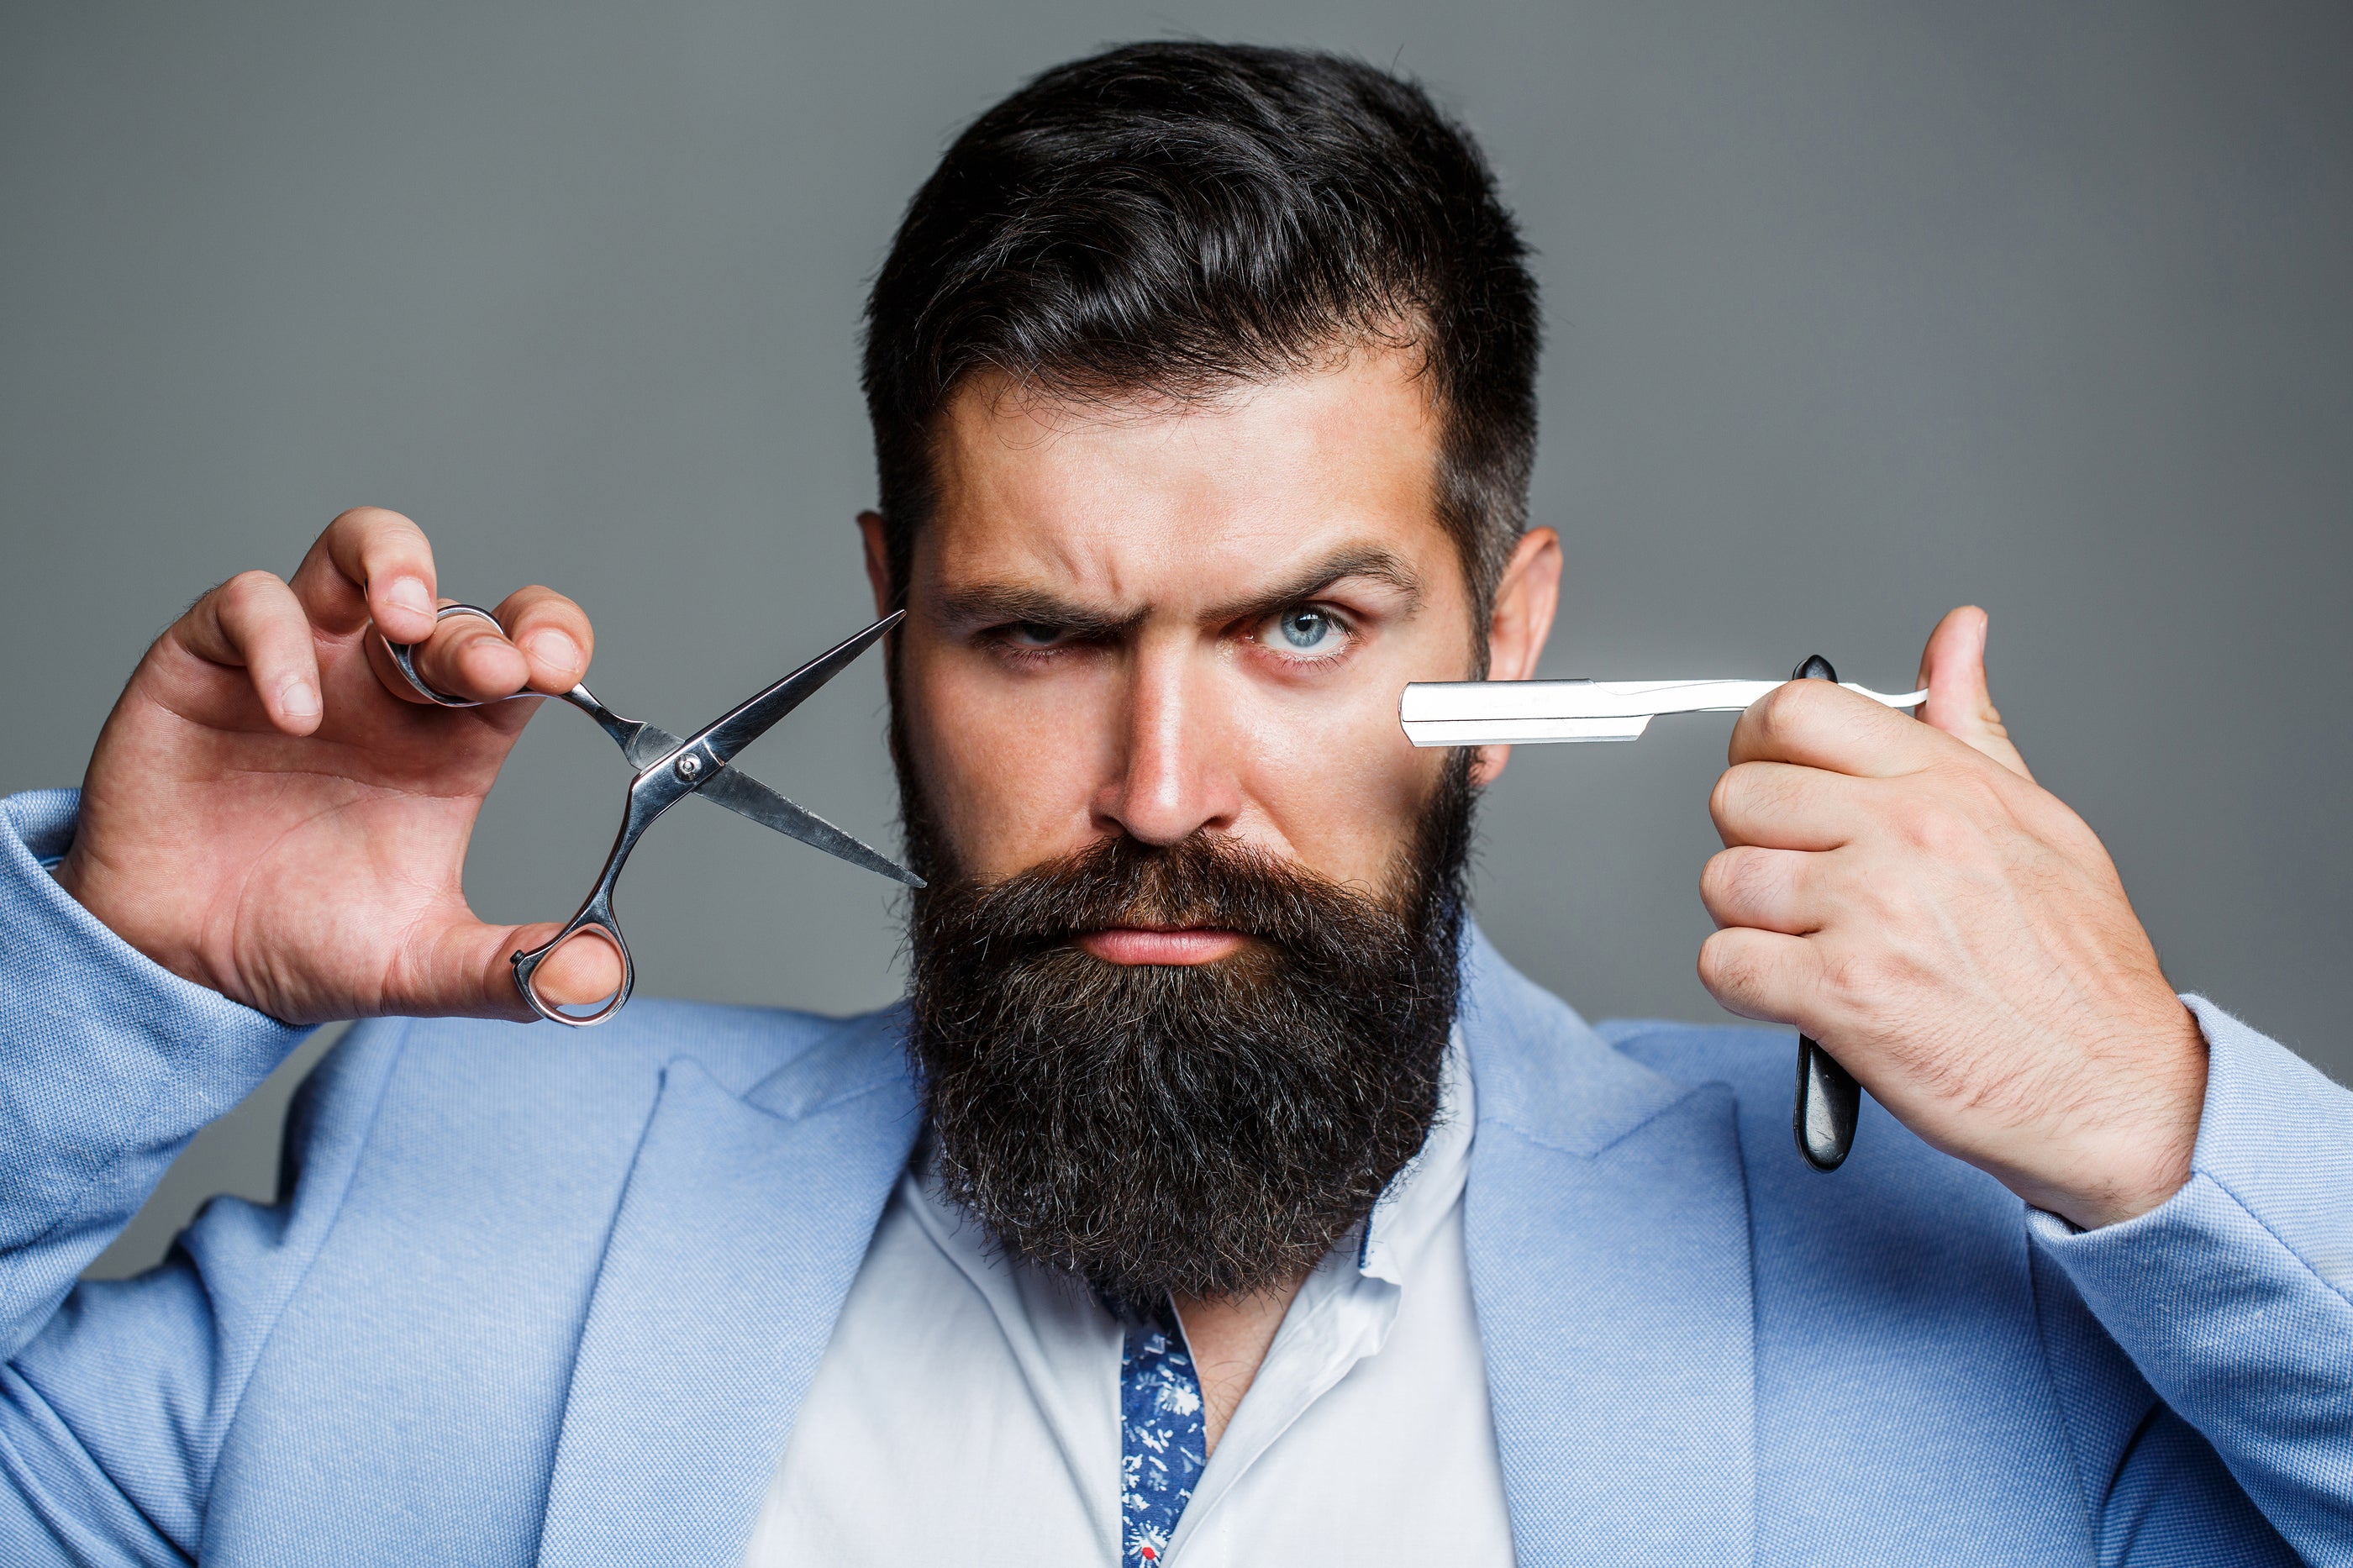 Squatch Q&A: Do You Need To Wash Your Beard? - Dr. Squatch